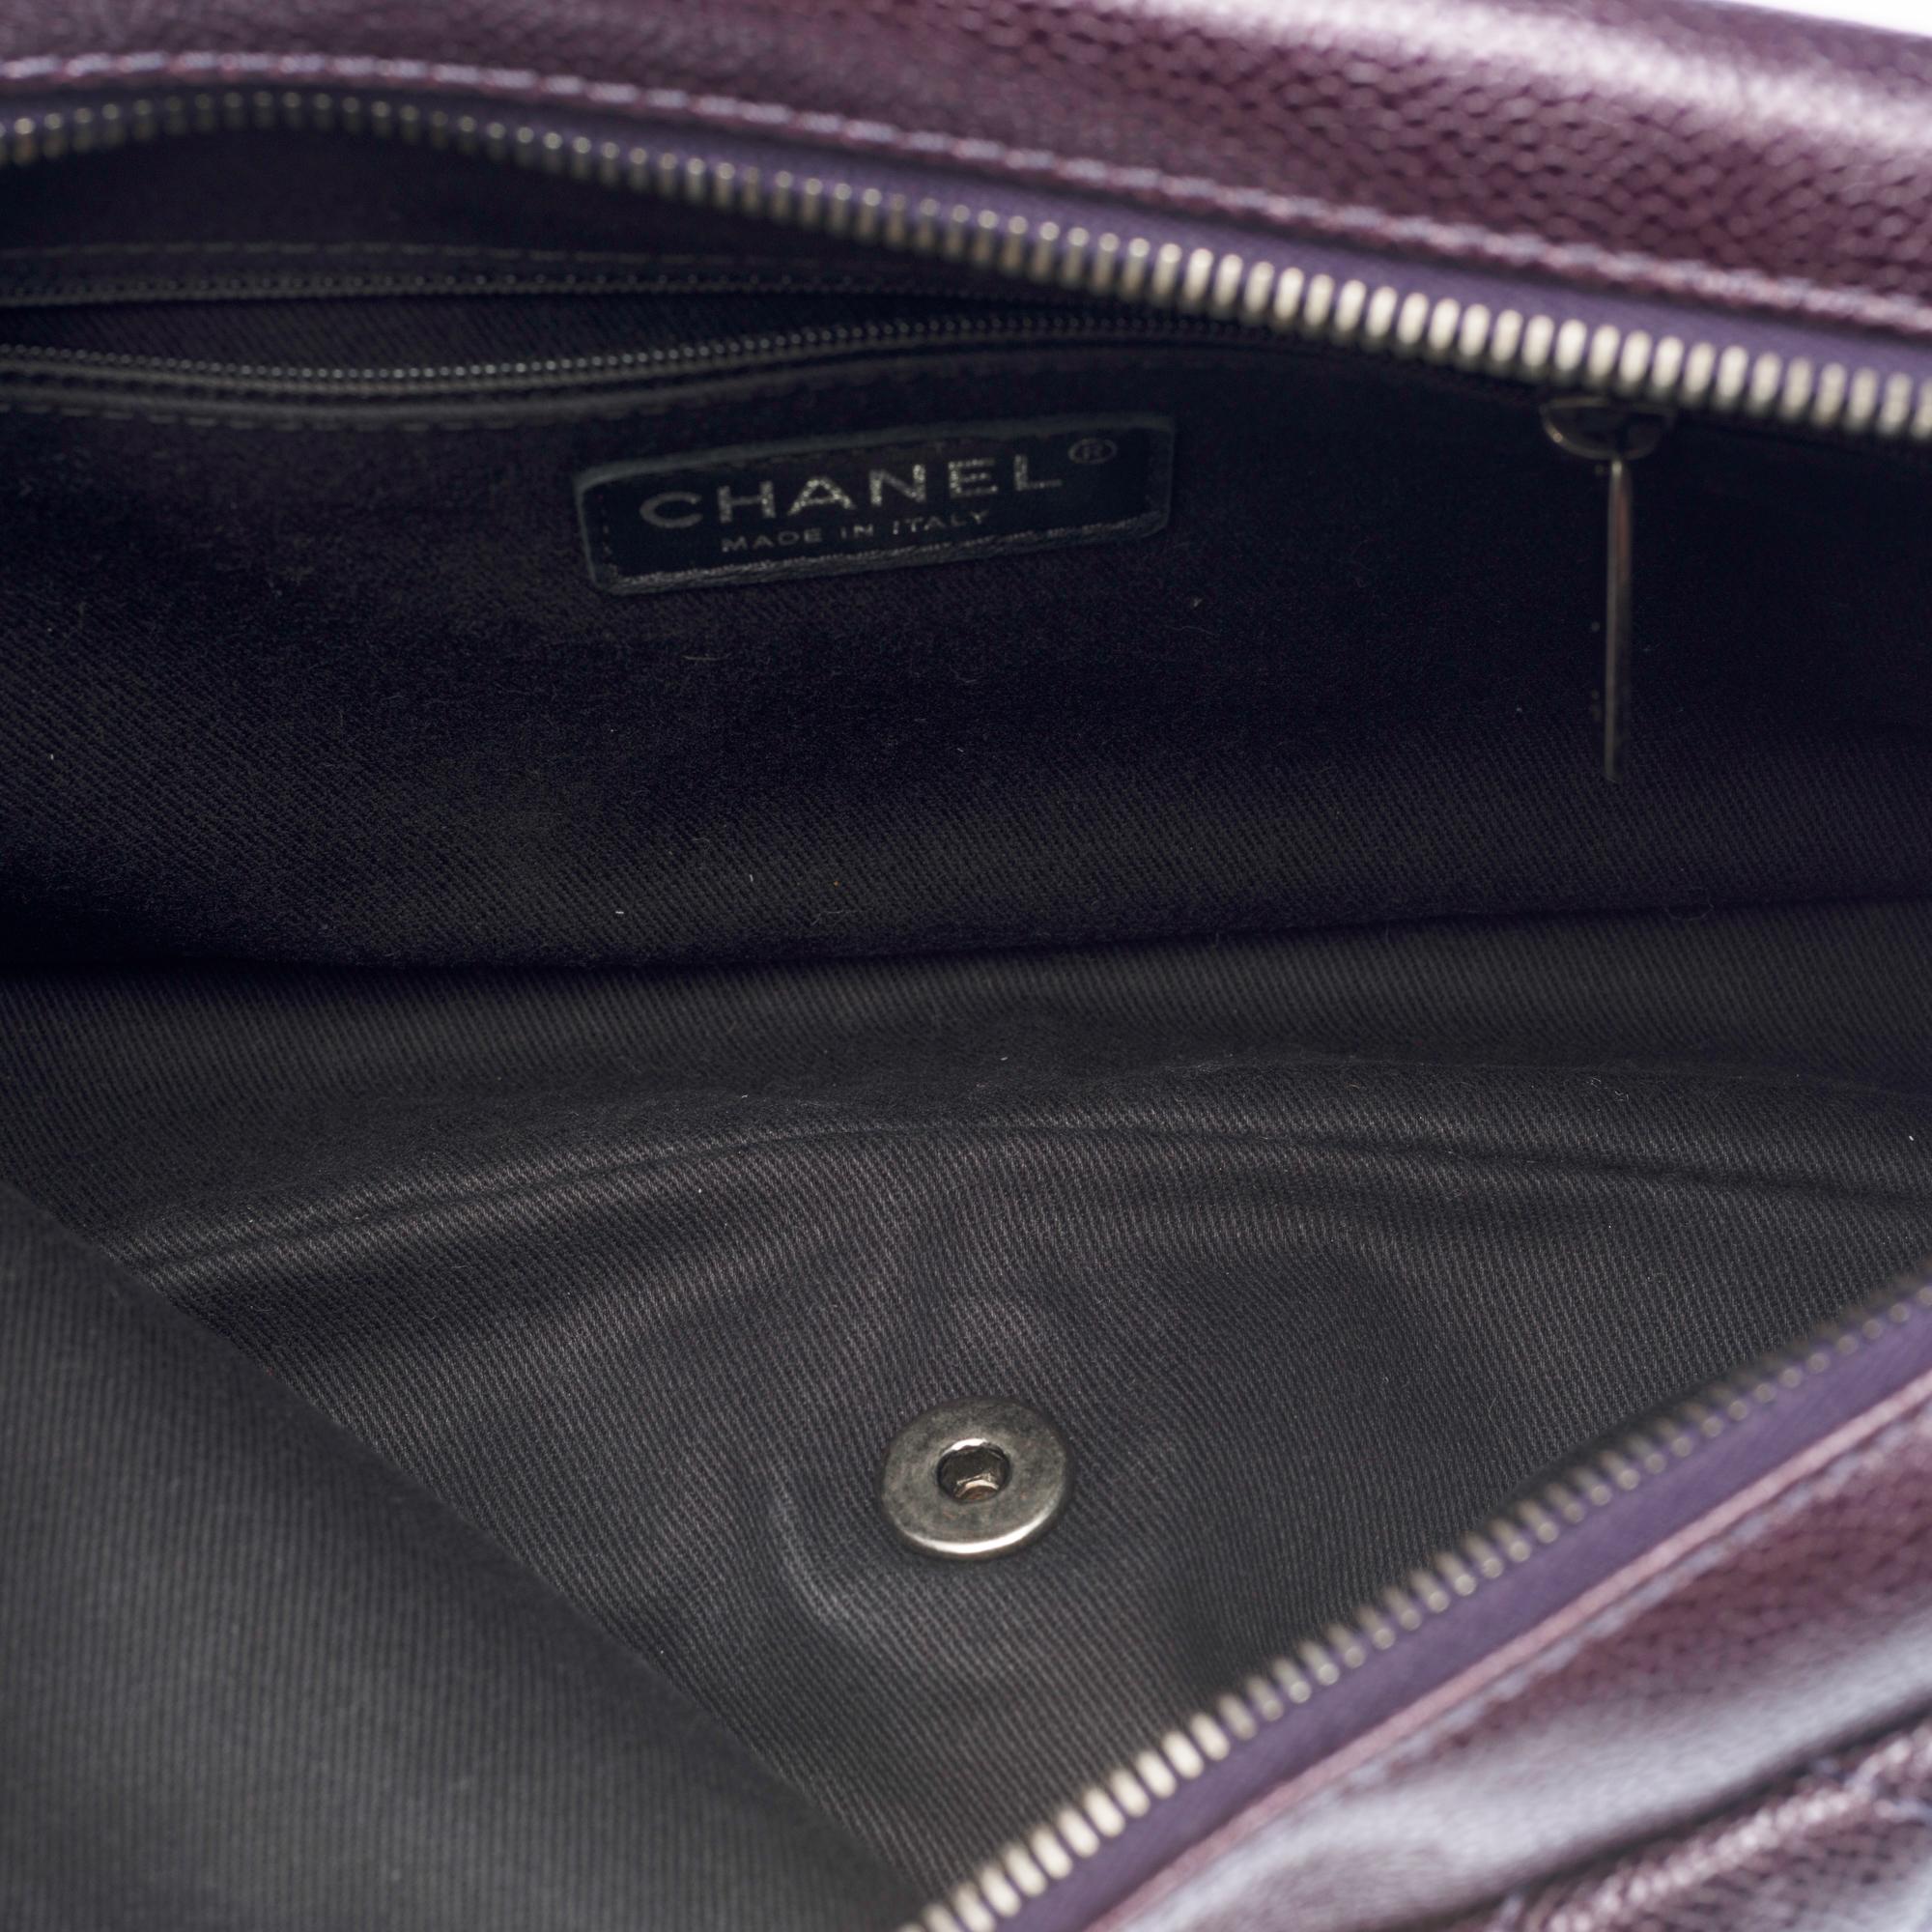 Stunning Chanel Classic shoulder flap bag in purple caviar leather, SHW 2